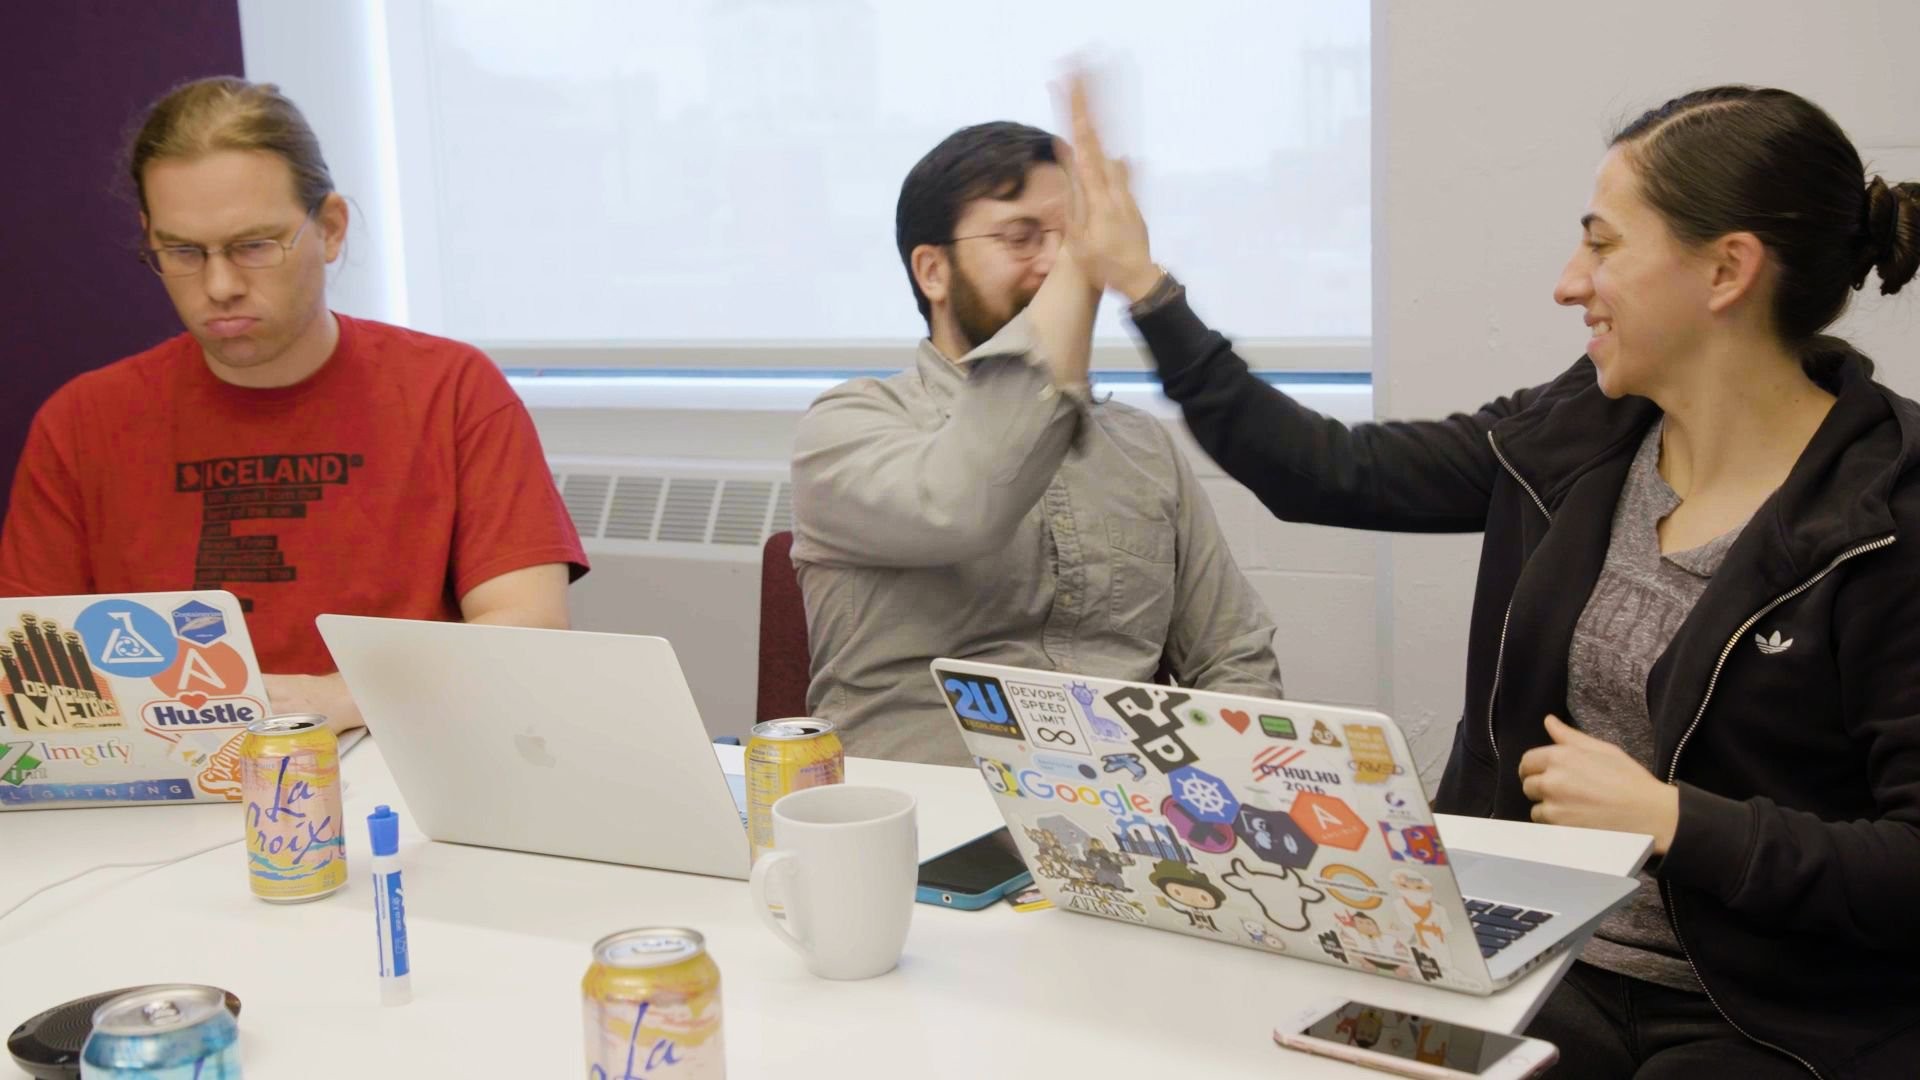 Colleagues high five each other next to laptops with lots of stickers on them